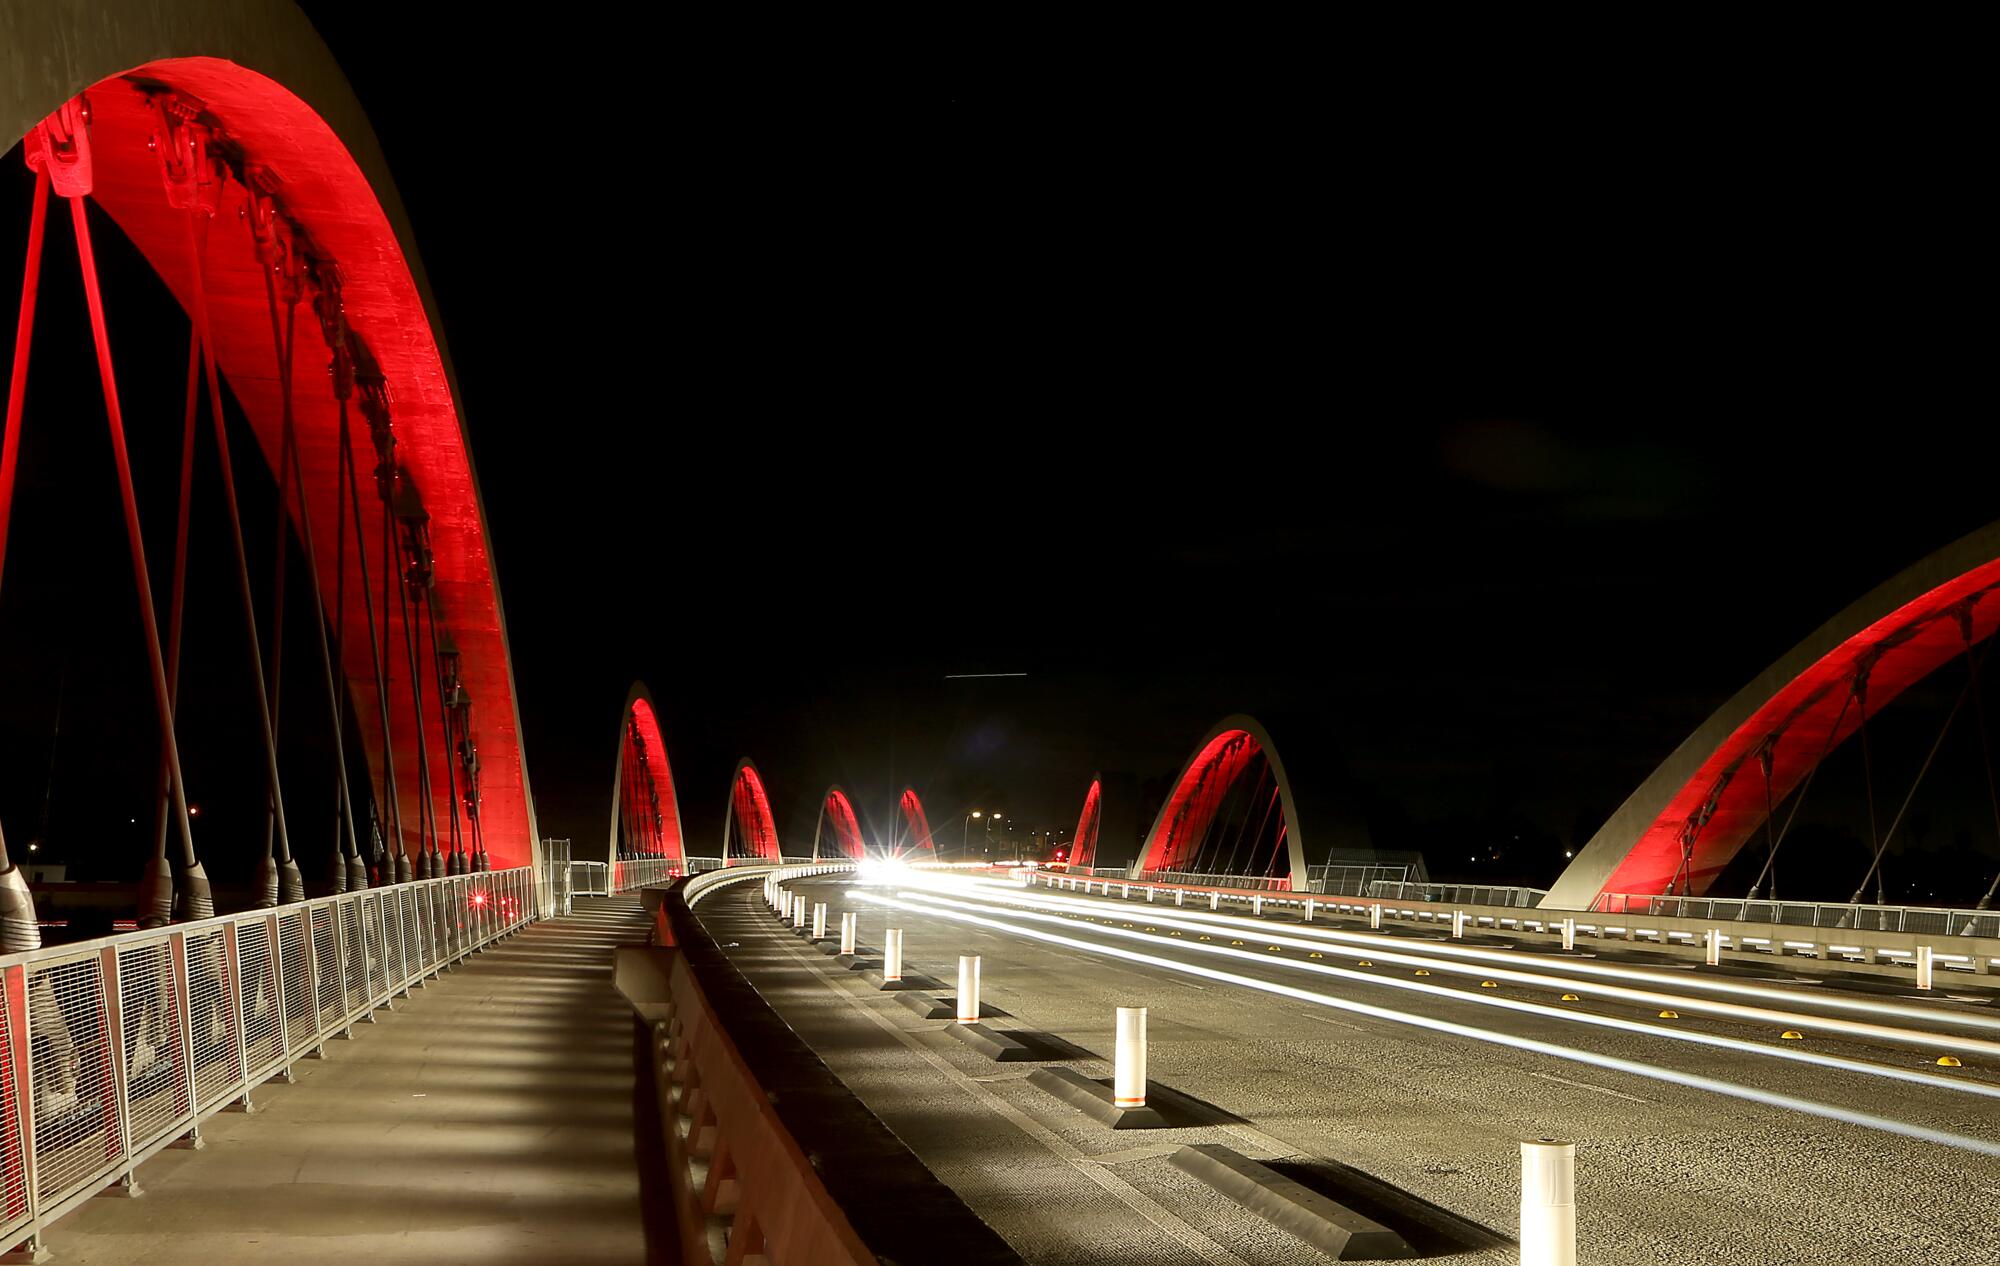 Arches on a bridge are lighted red.